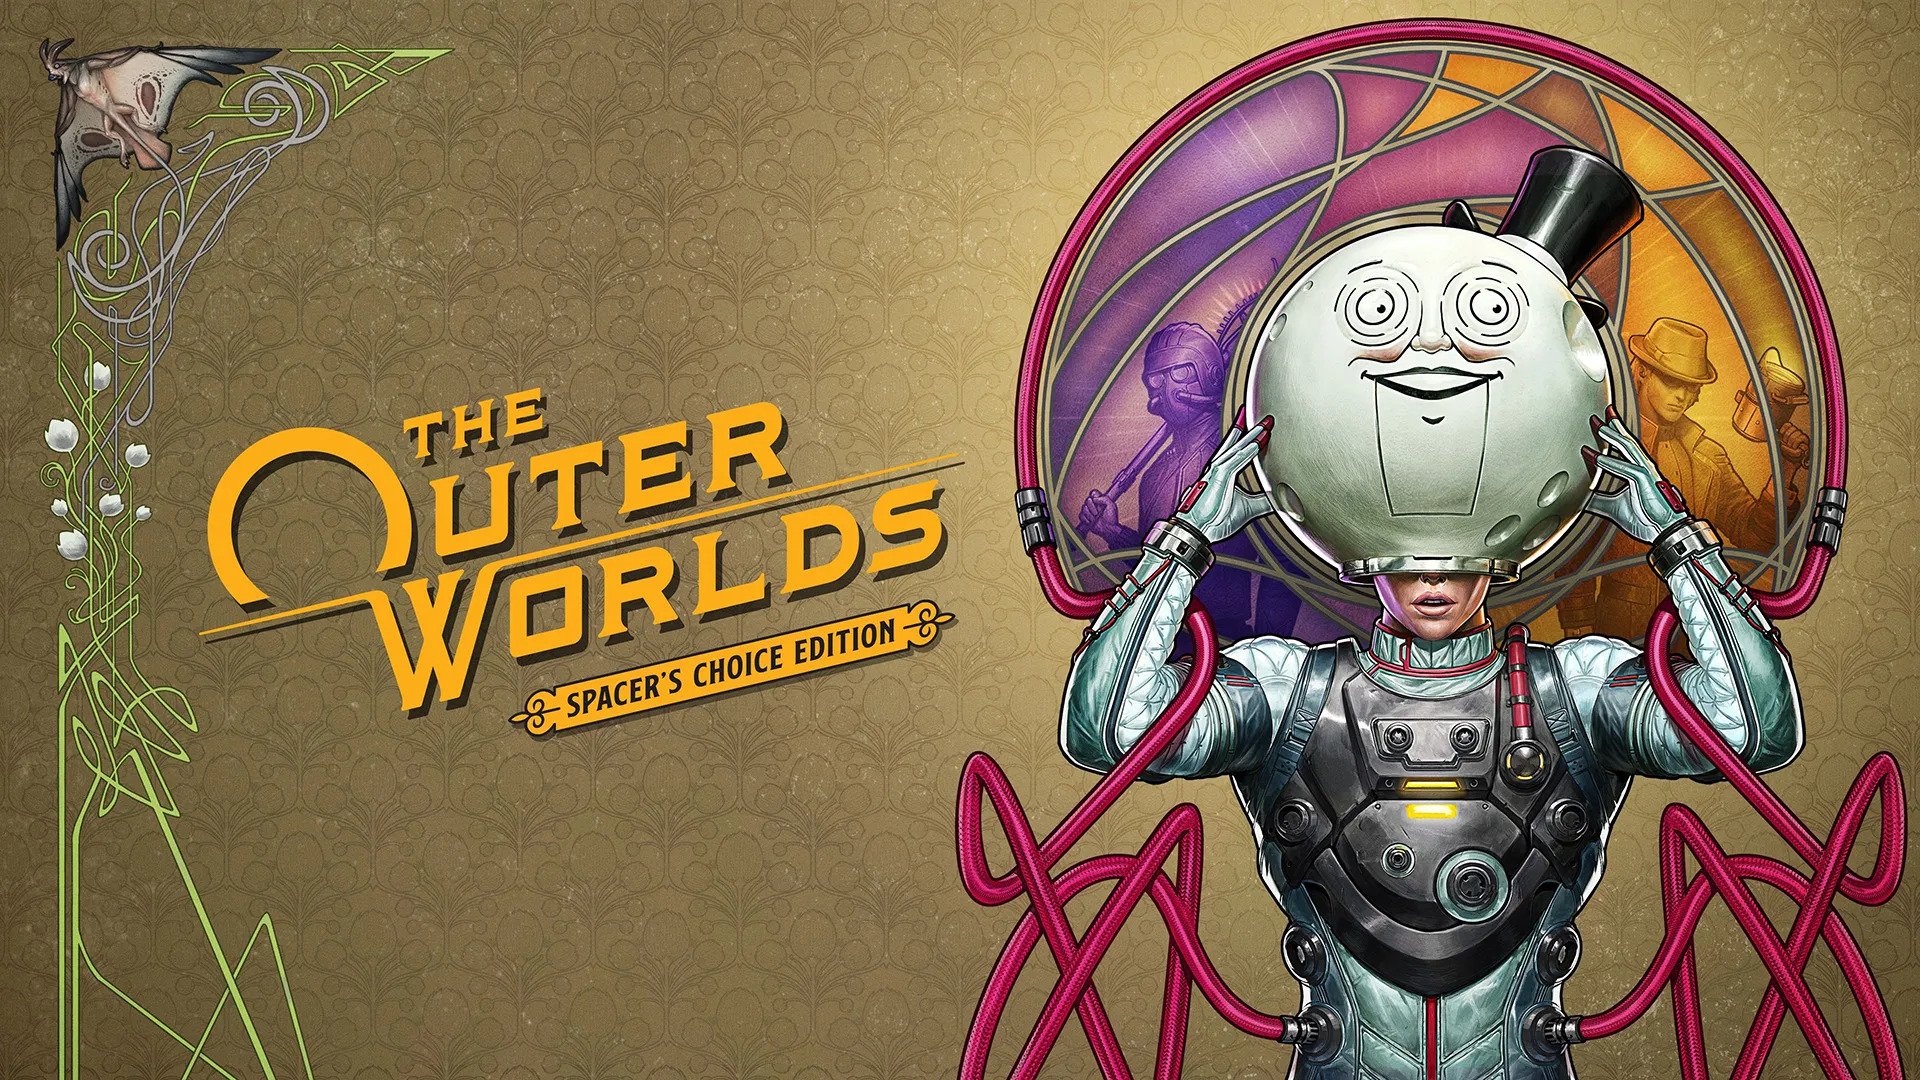 The Outer Worlds: Spacer’s Choice Edition Now Available